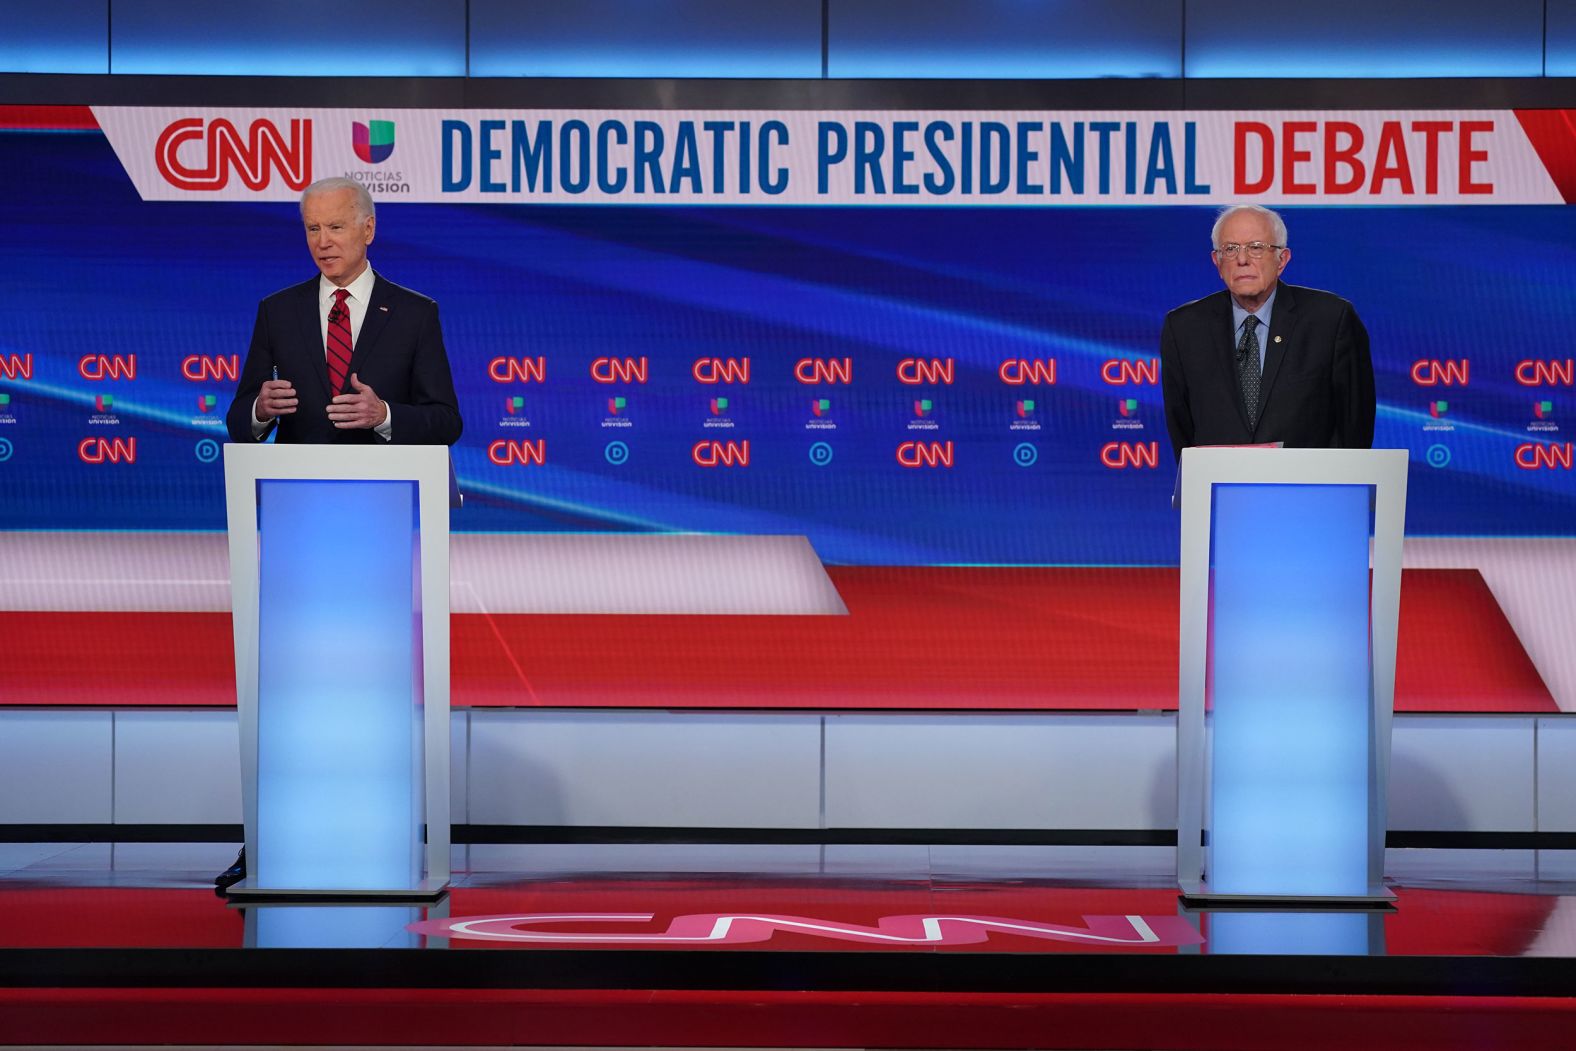 Biden came into the debate with a significant lead in delegates. Sanders has acknowledged his path to the nomination is narrowing.